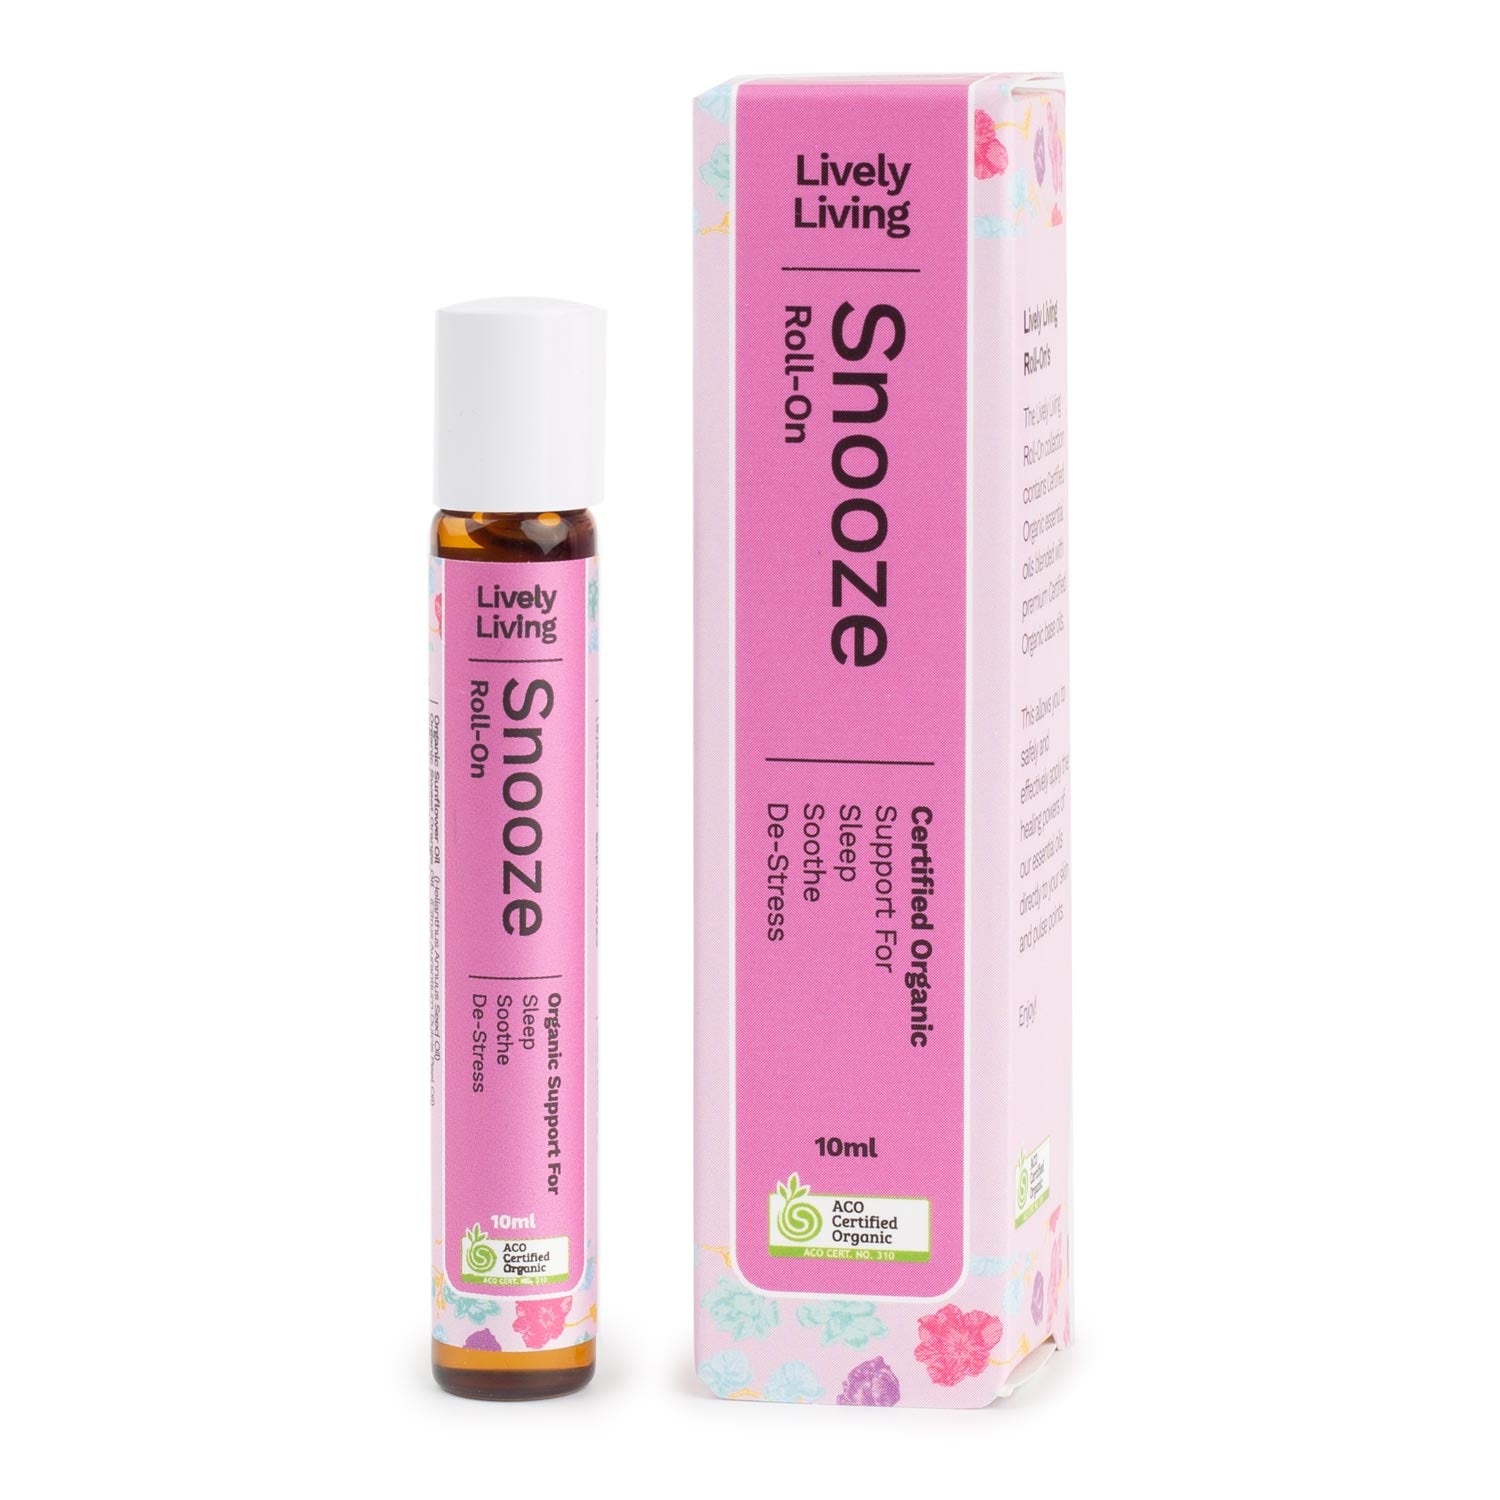 Snooze Roll-on Blend